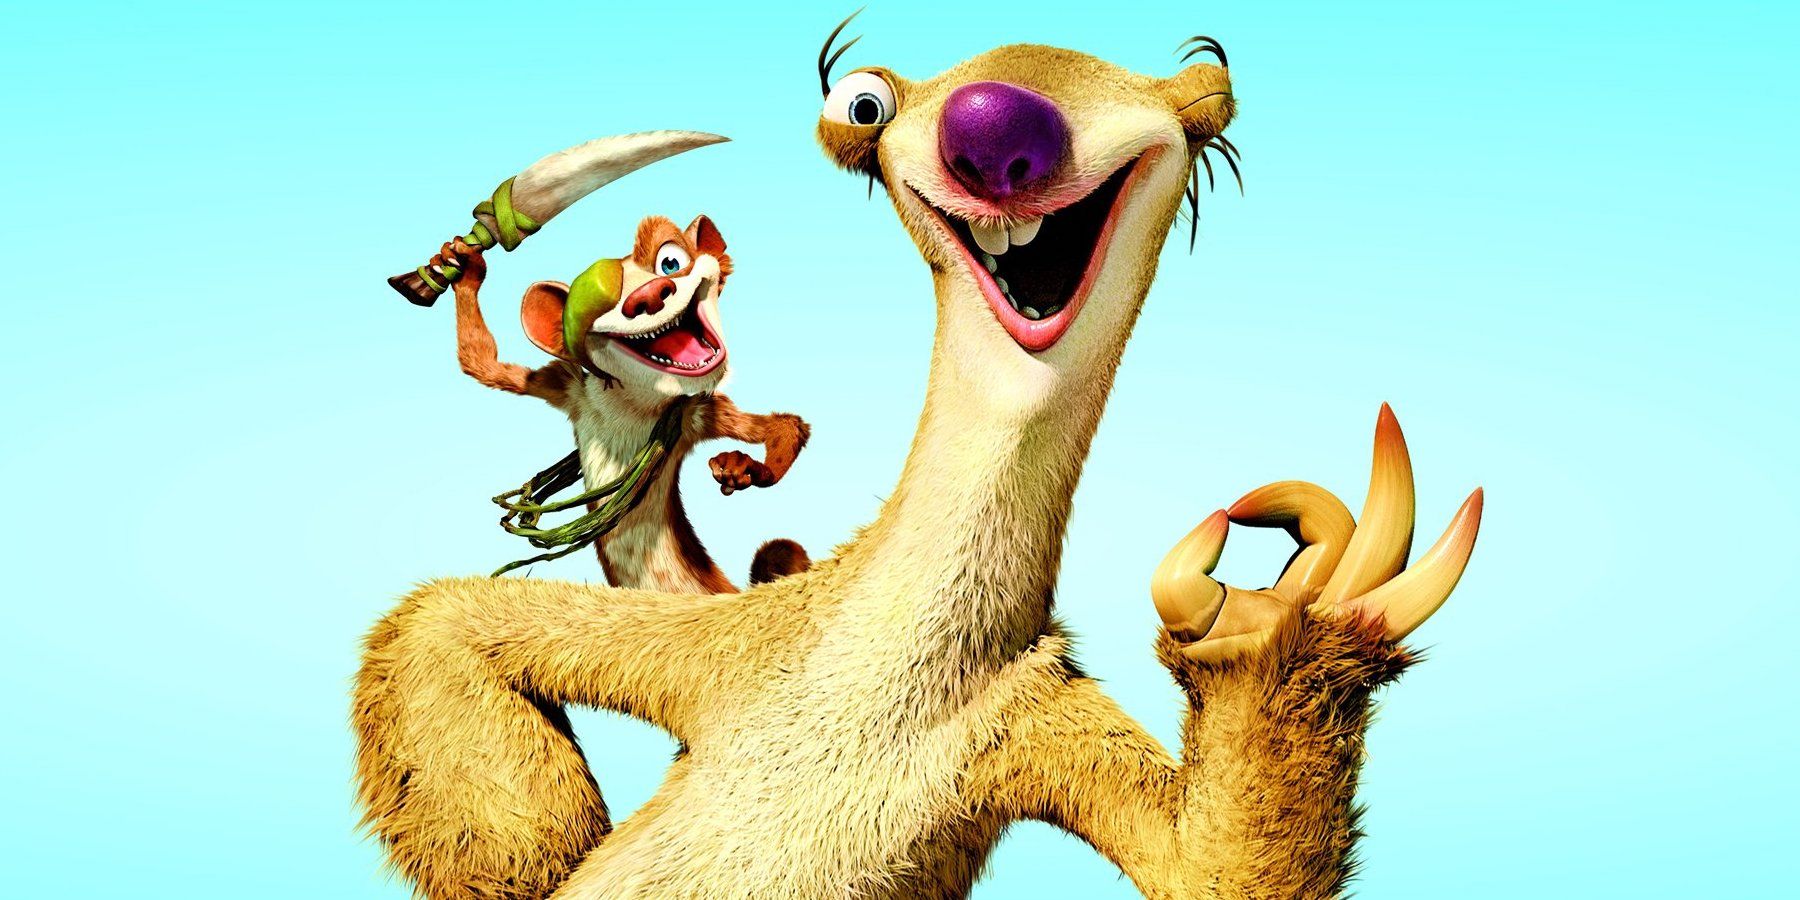 10 Continuity Errors In The Ice Age Franchise